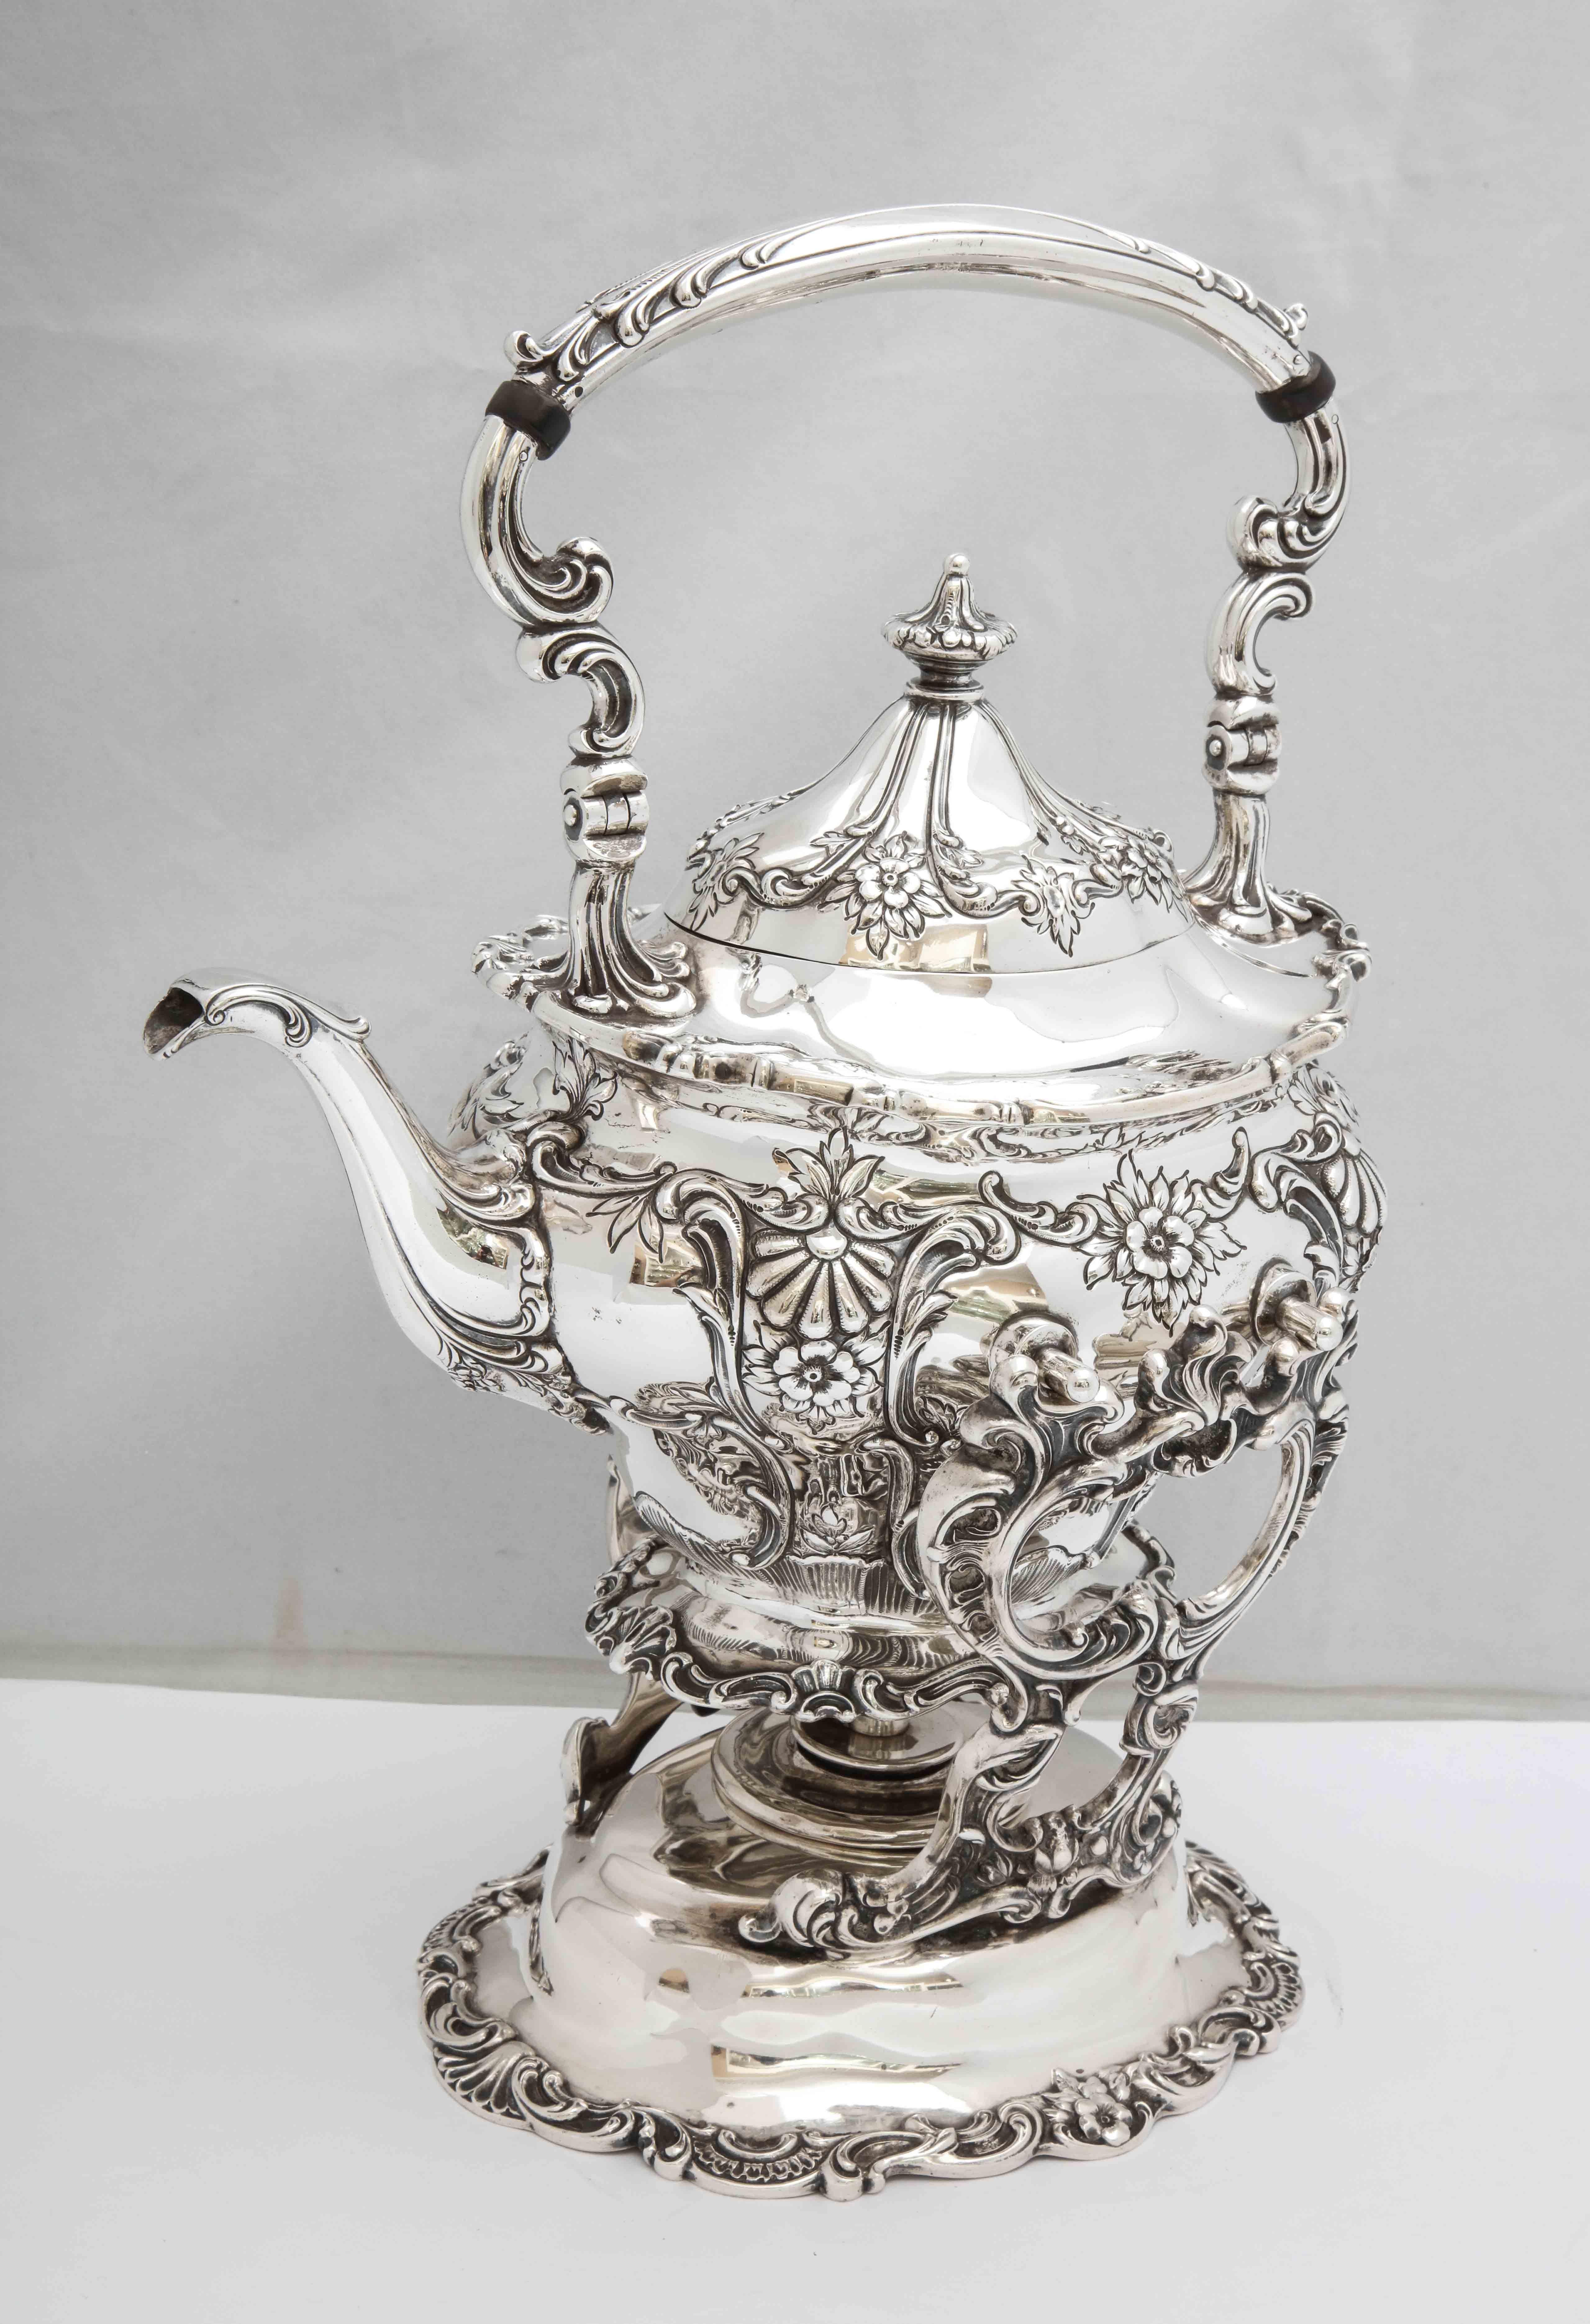 Victorian-Style, sterling silver tea kettle on stand with original, working, sterling silver burner, Gorham Mfg. Co., Providence, Rhode Island, year hallmarked for 1903. Beautiful floral design. Measures 14 1/2 inches high to top of handle x 10